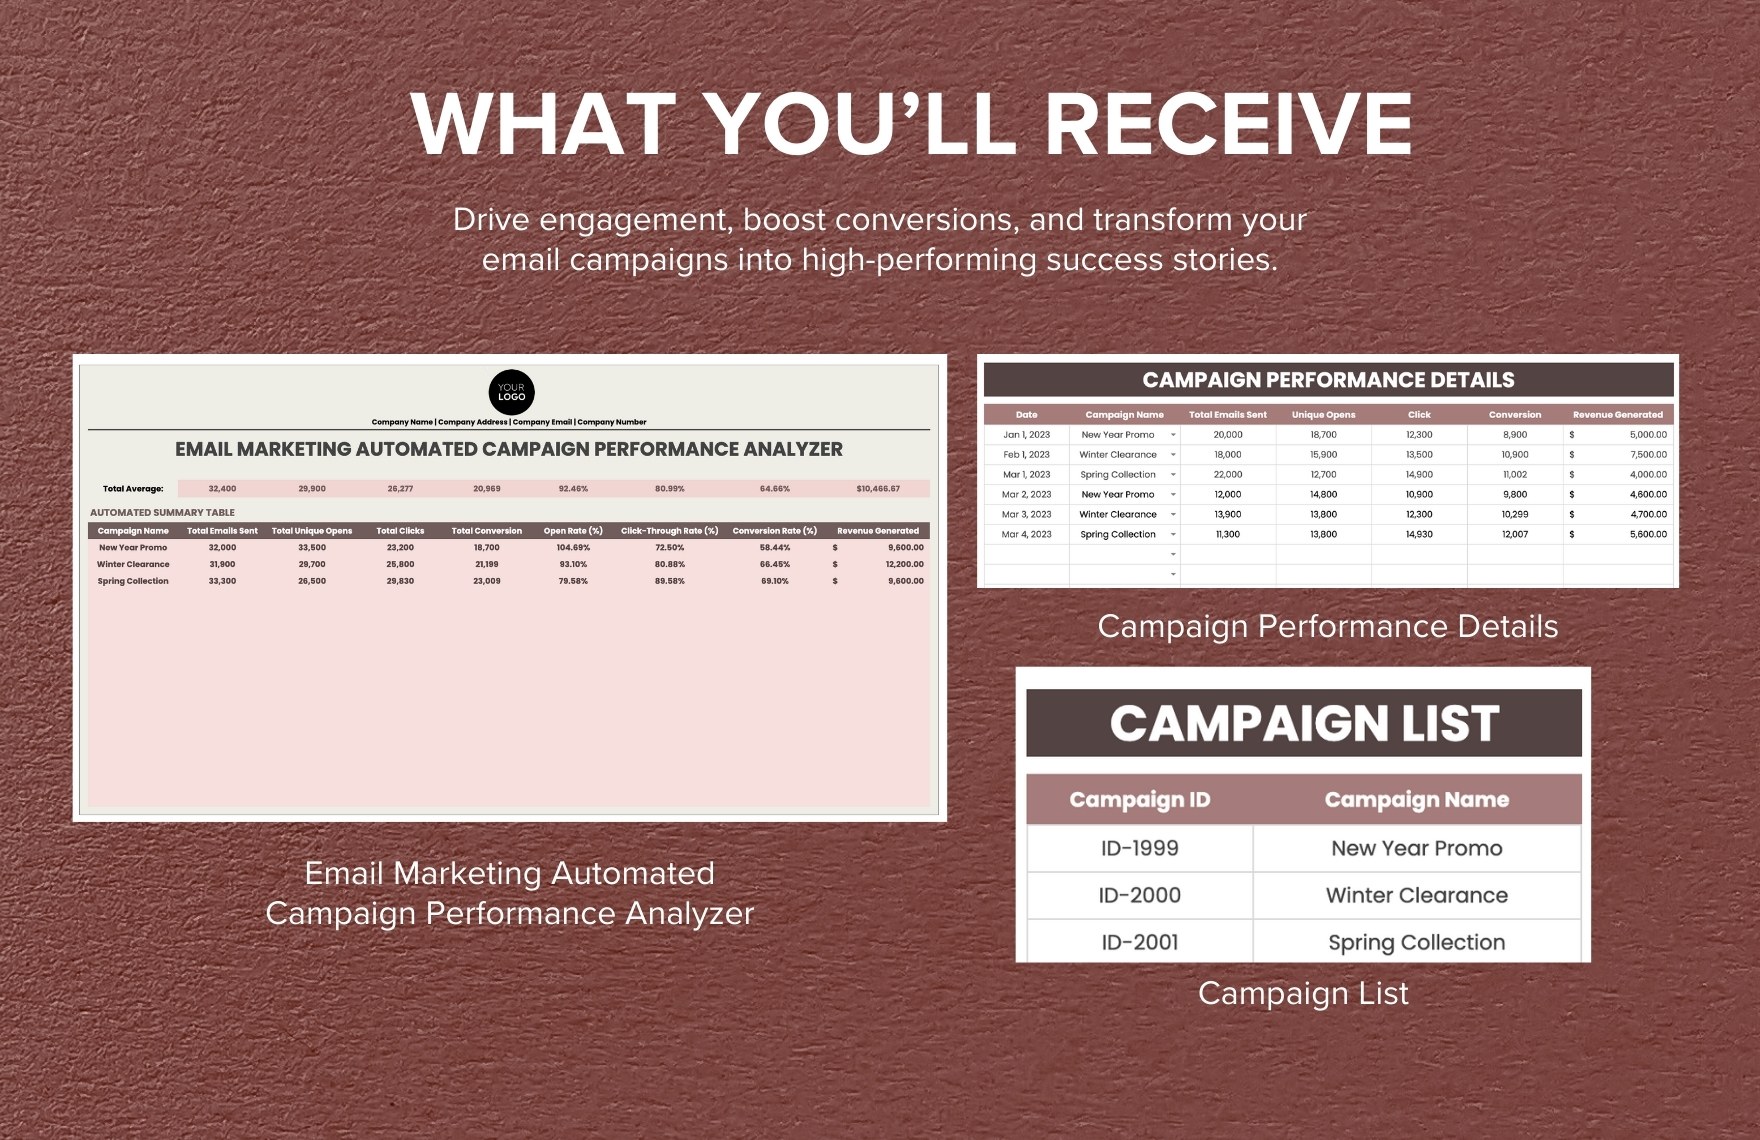 Email Marketing Automated Campaign Performance Analyzer Template